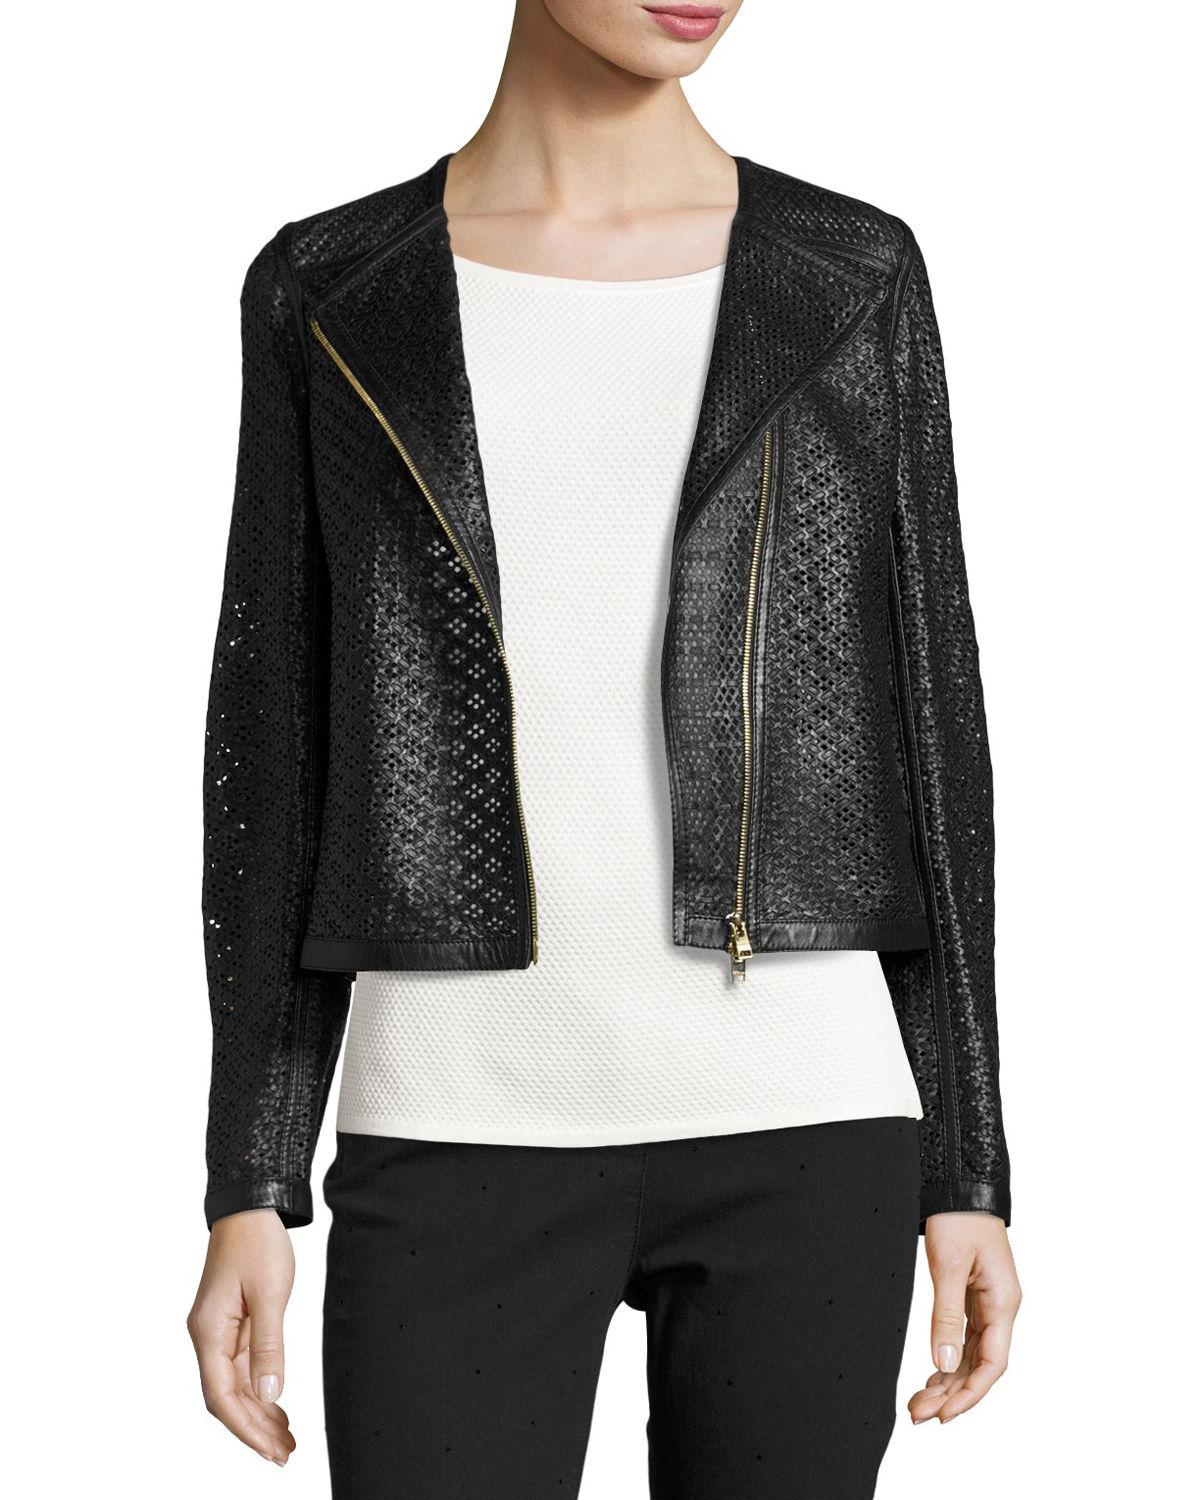 Lyst - Escada Perforated Leather Moto Jacket in Black